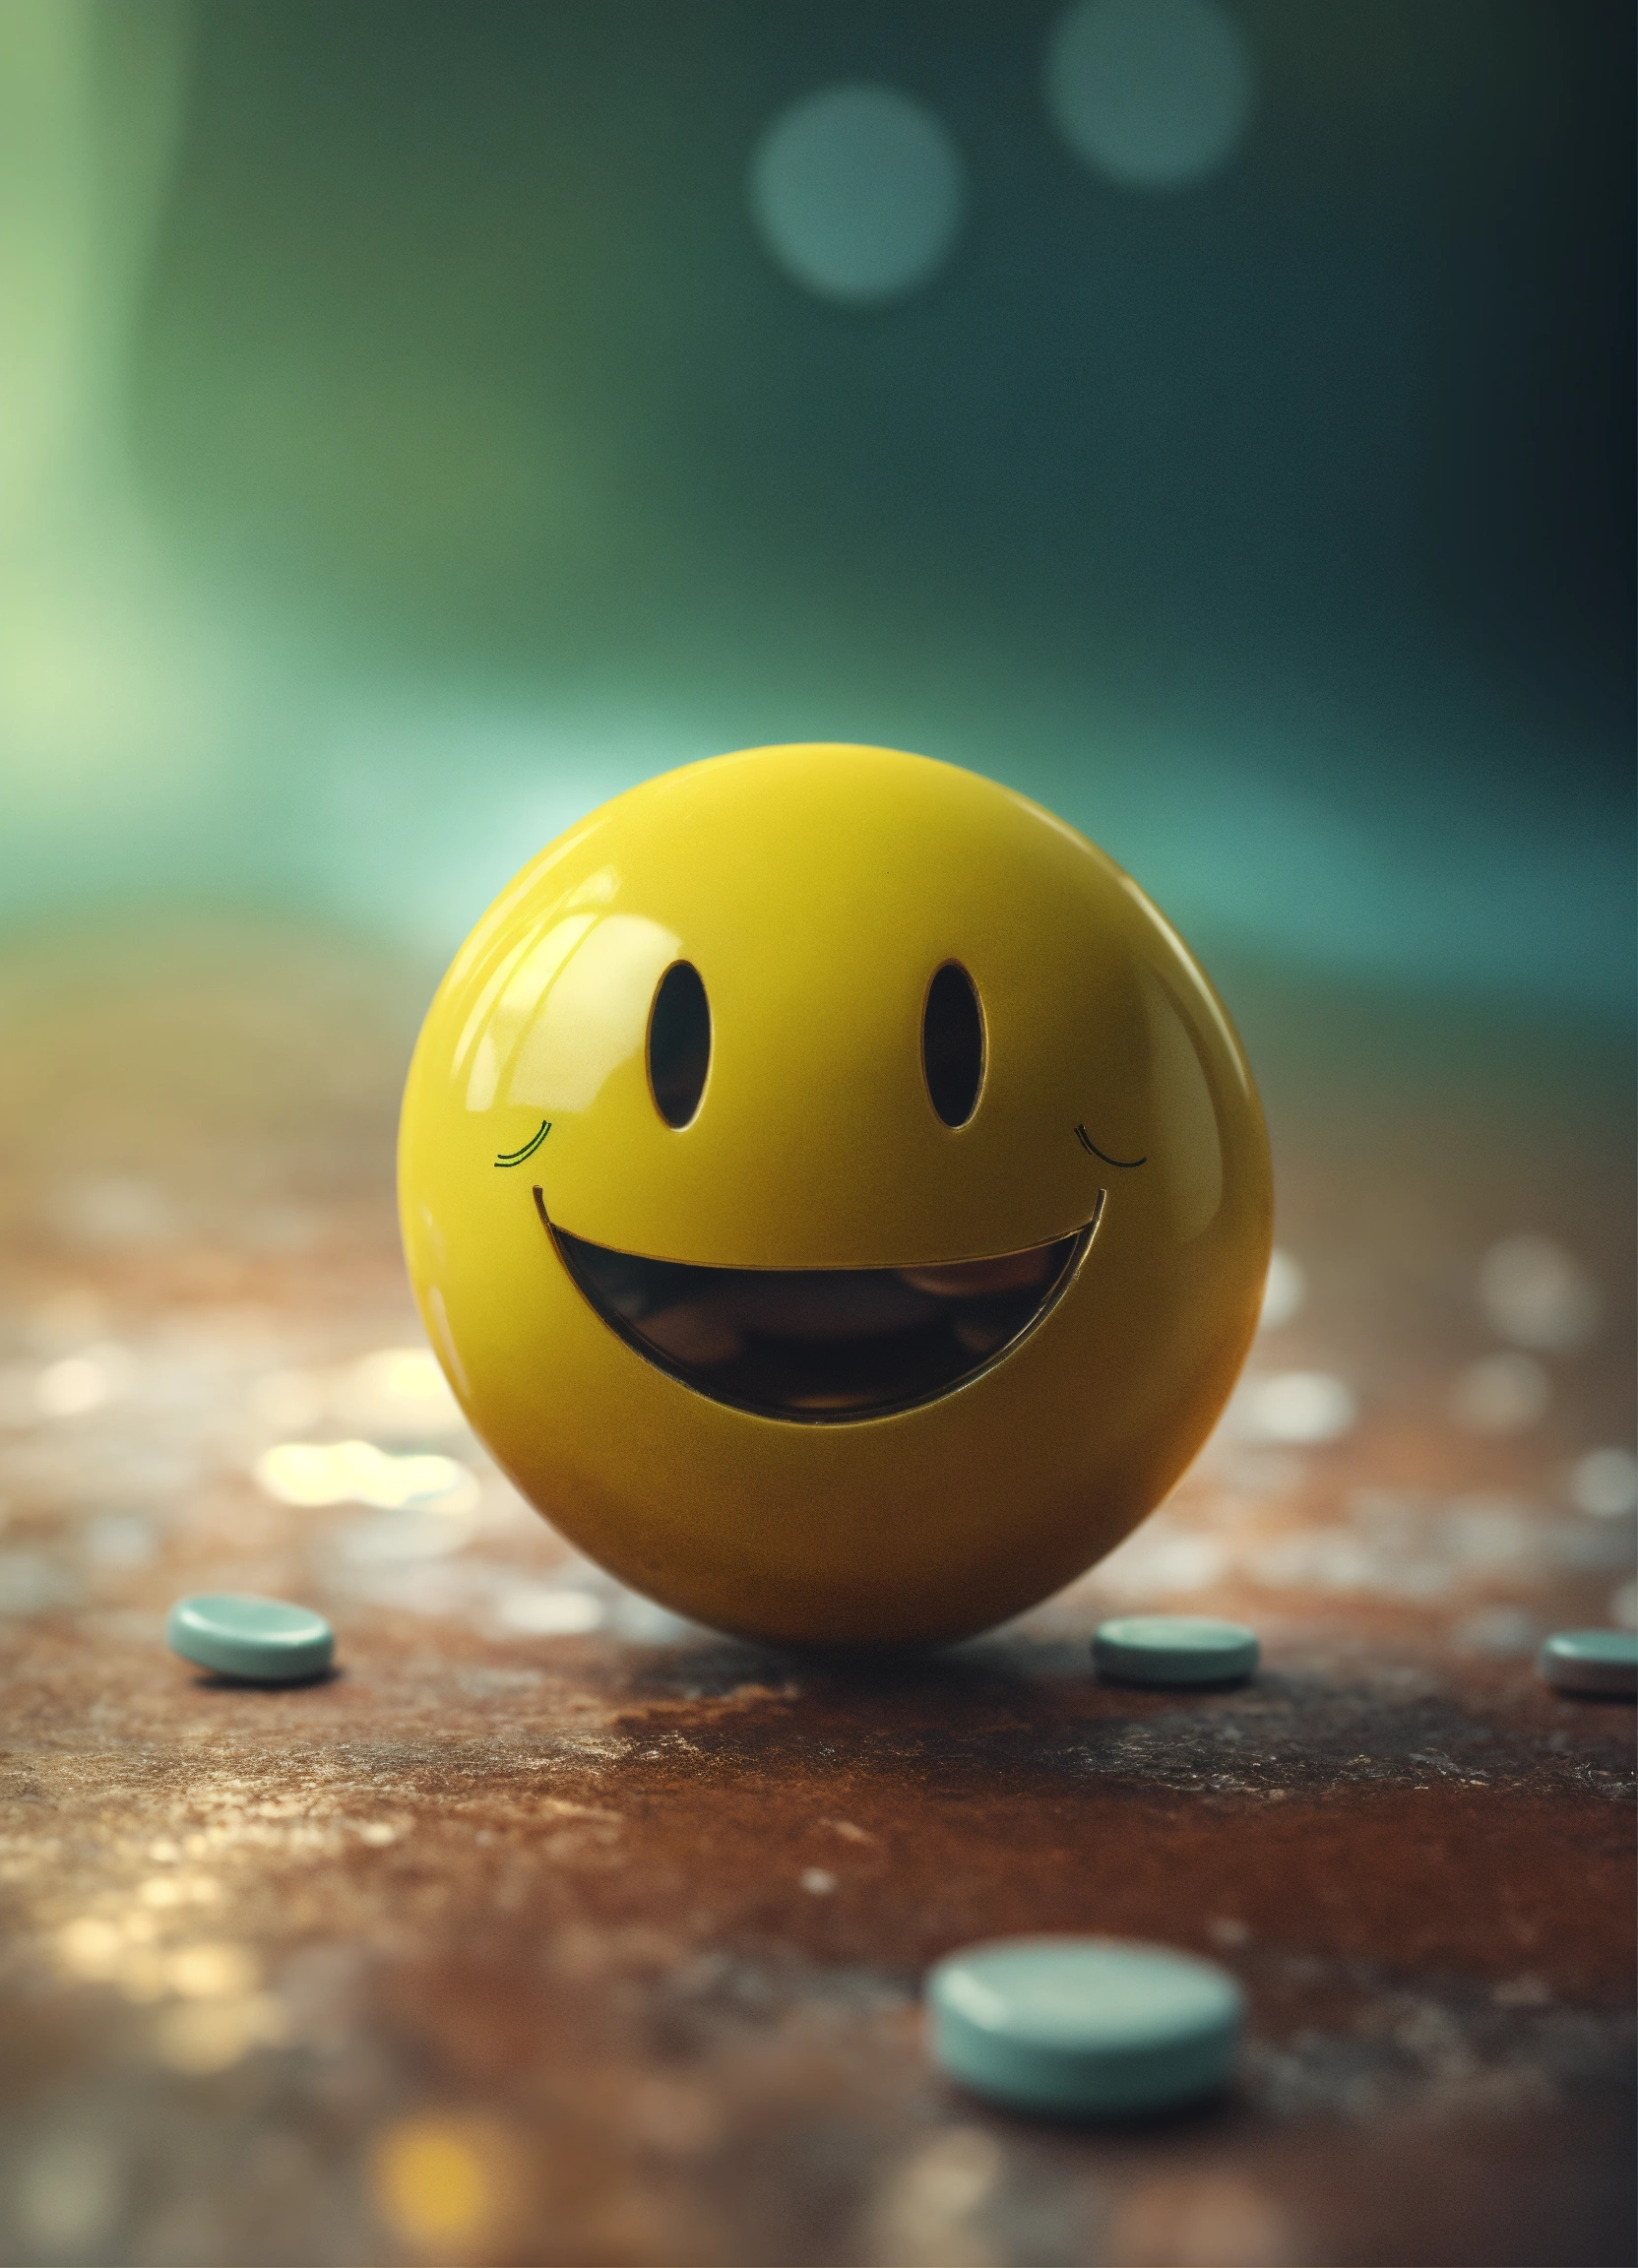 Lexica - One small pill with a smiley face on it , 4k render 